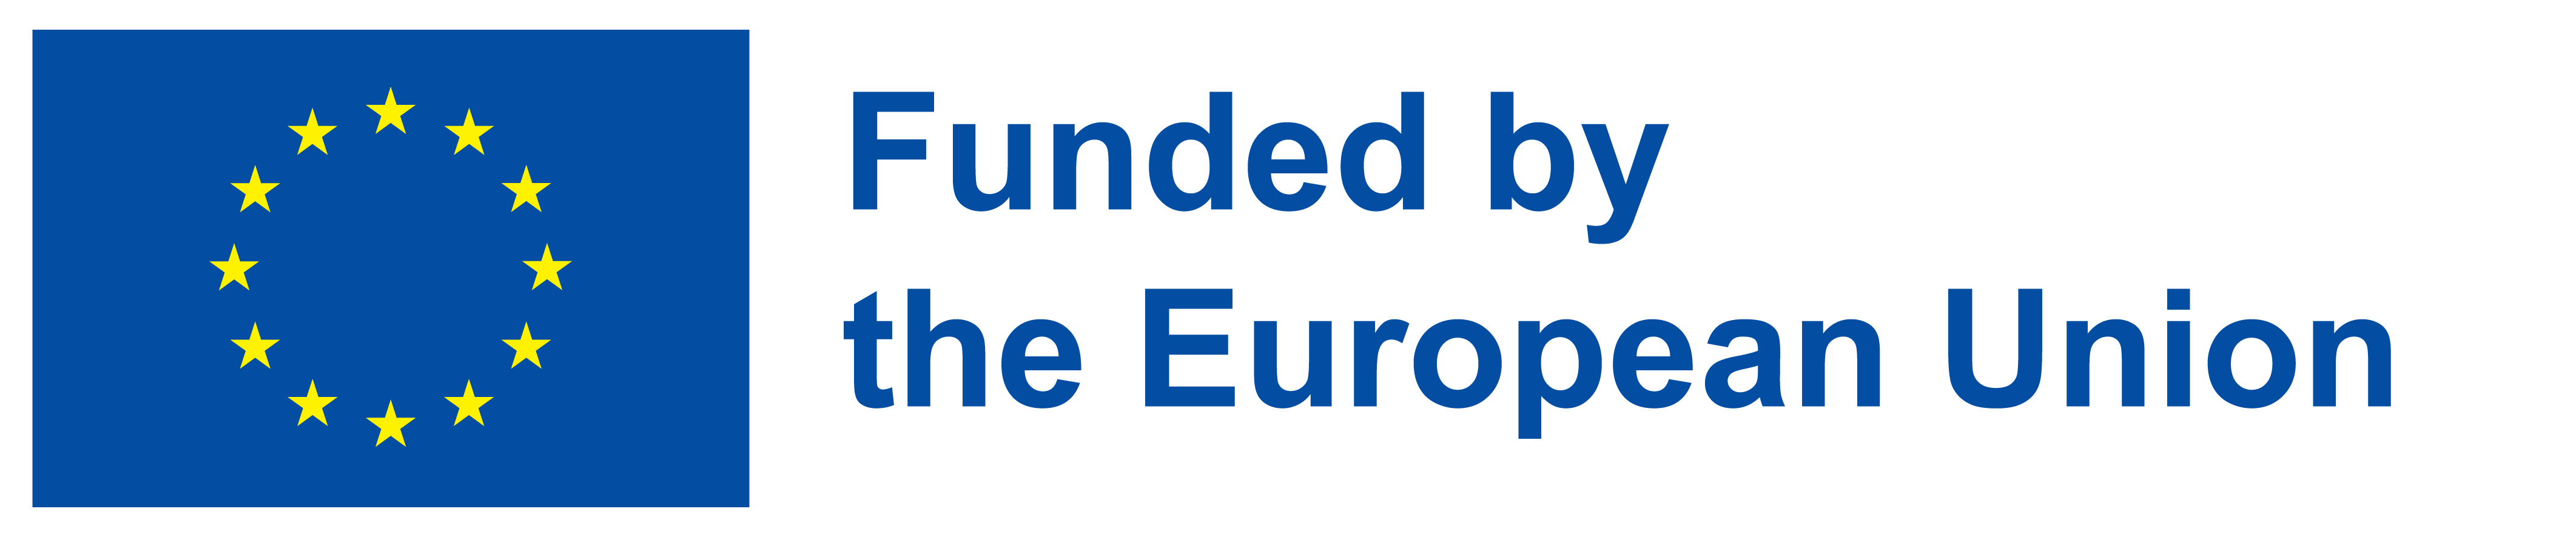 Funded by the European Union logo.